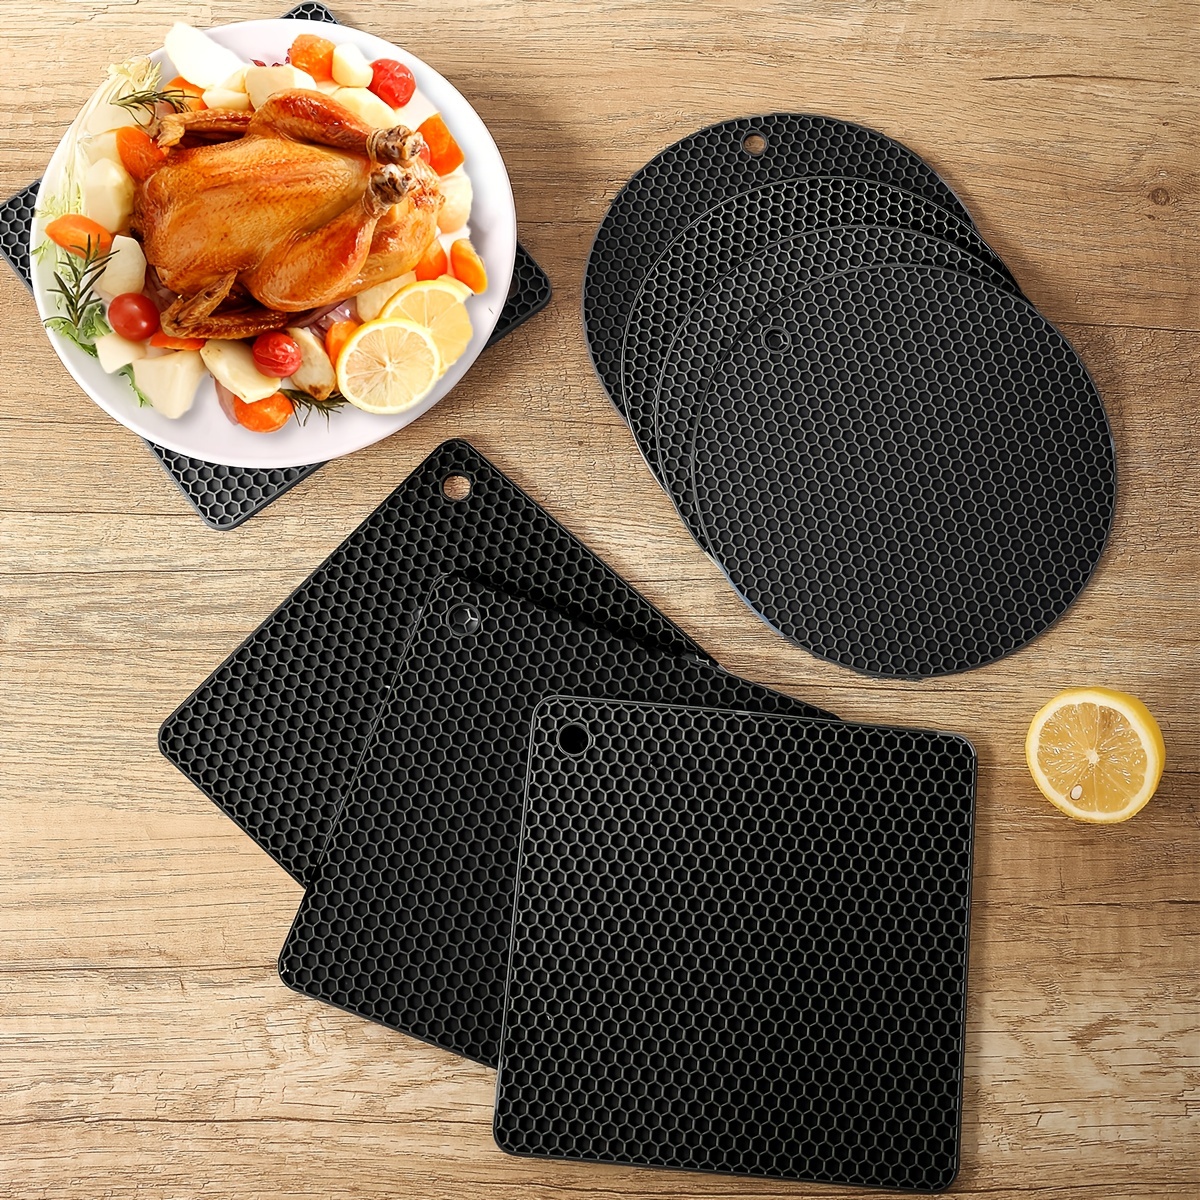 Hot Pads for Kitchen Silicone Mats for Hot Pots Silicone Mats for Hot Pot Holder Silicone Mats Multi Purpose Silicone Mat Silicone Pot Holders Teapot